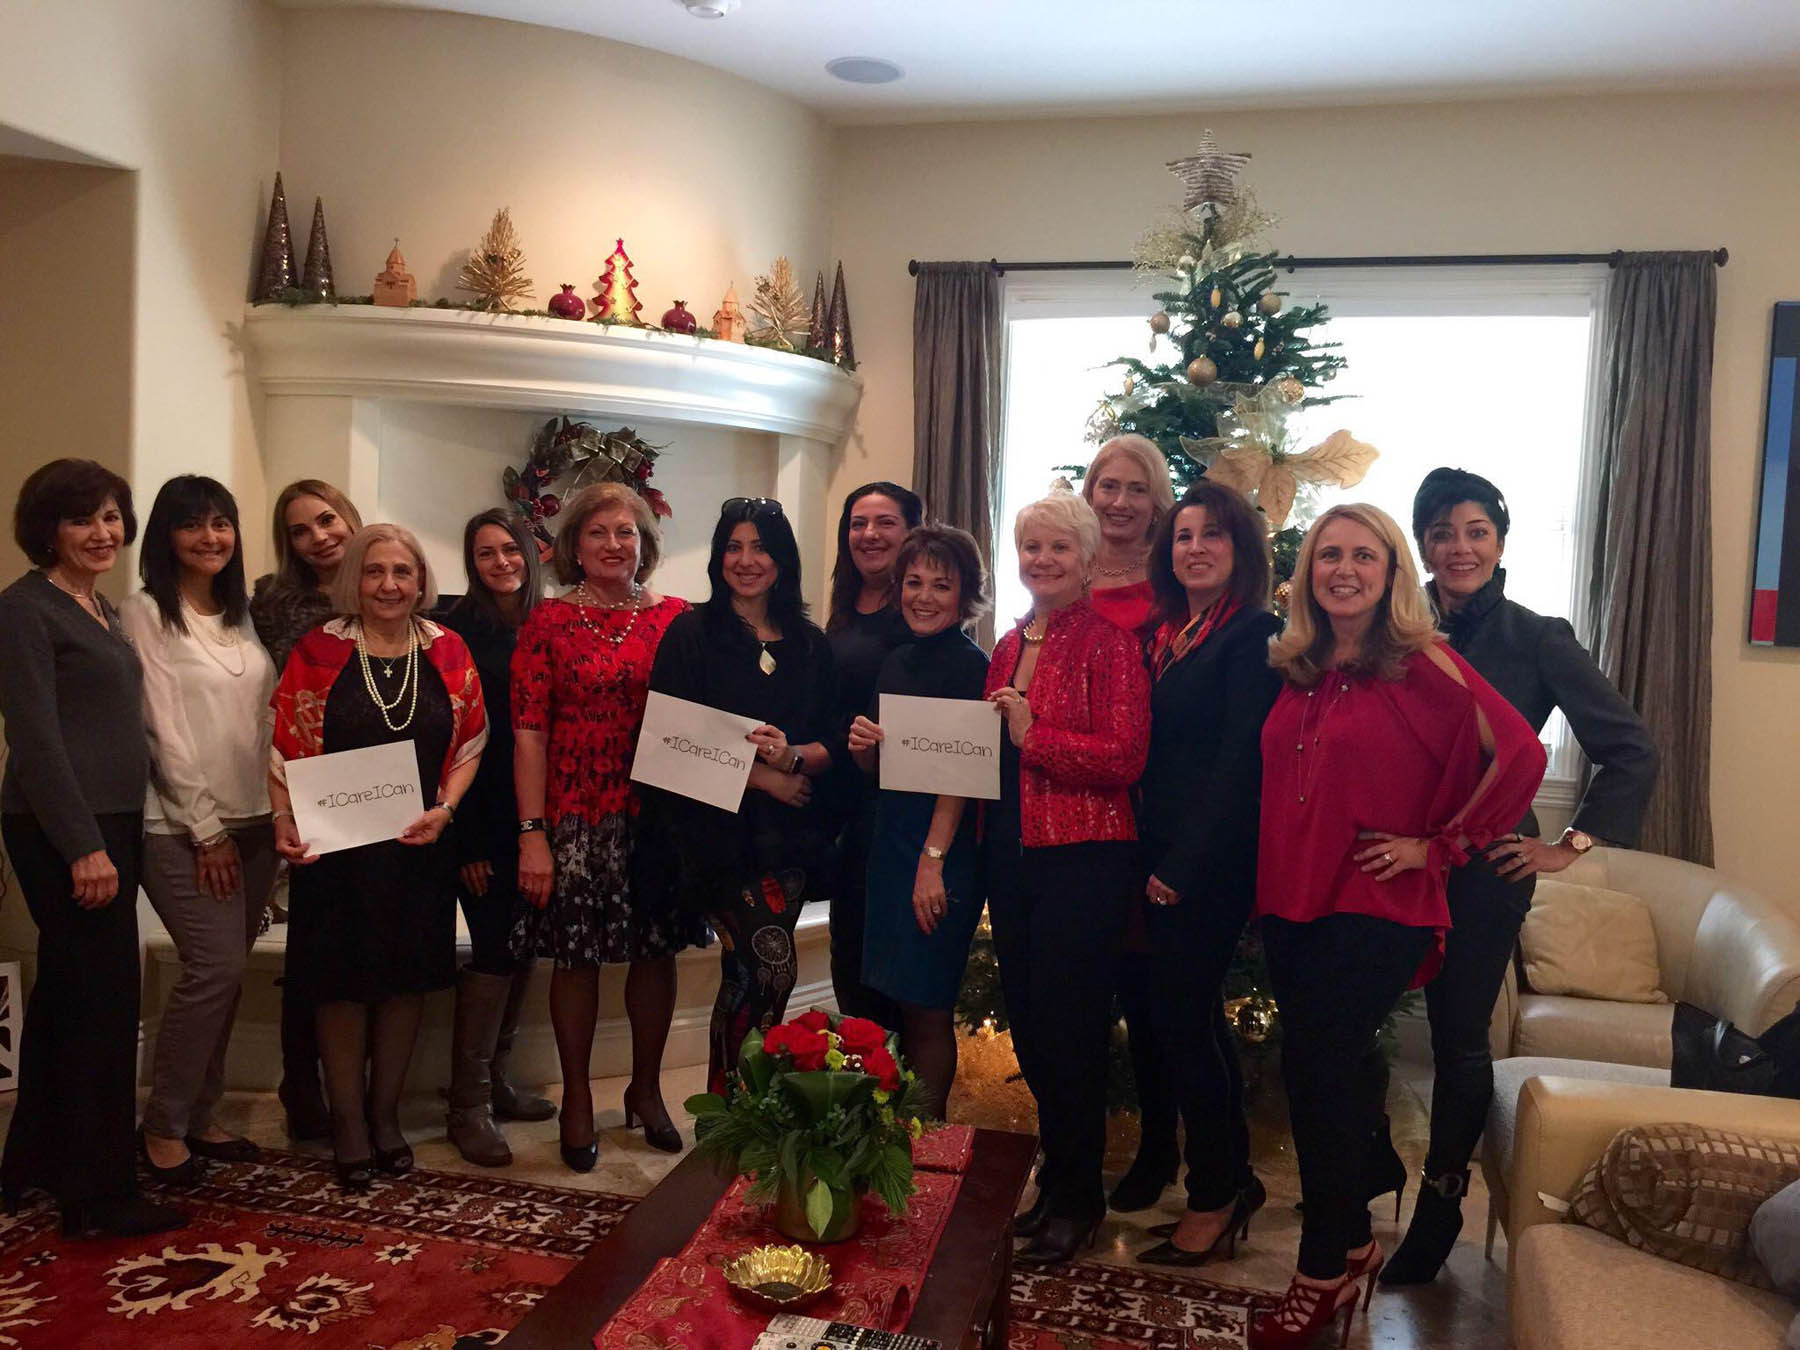 Nora Janoyan Balikian in San Diego held a holiday brunch with #ICareICan as its theme.